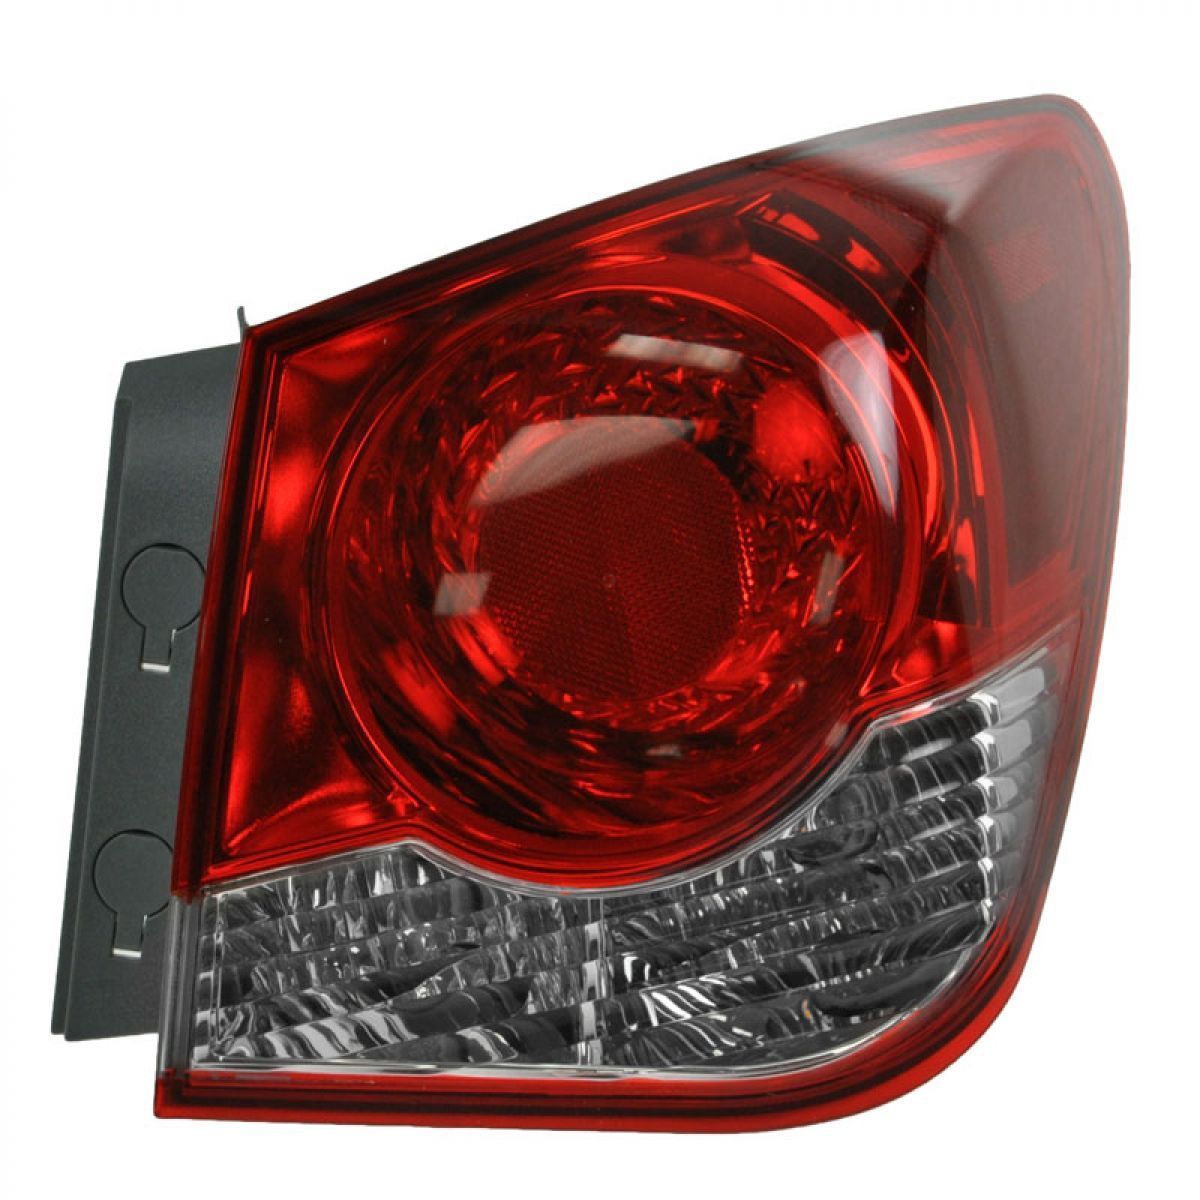 CRUZE 11-16 Right TAIL LAMP Assembly ON BODY NSF